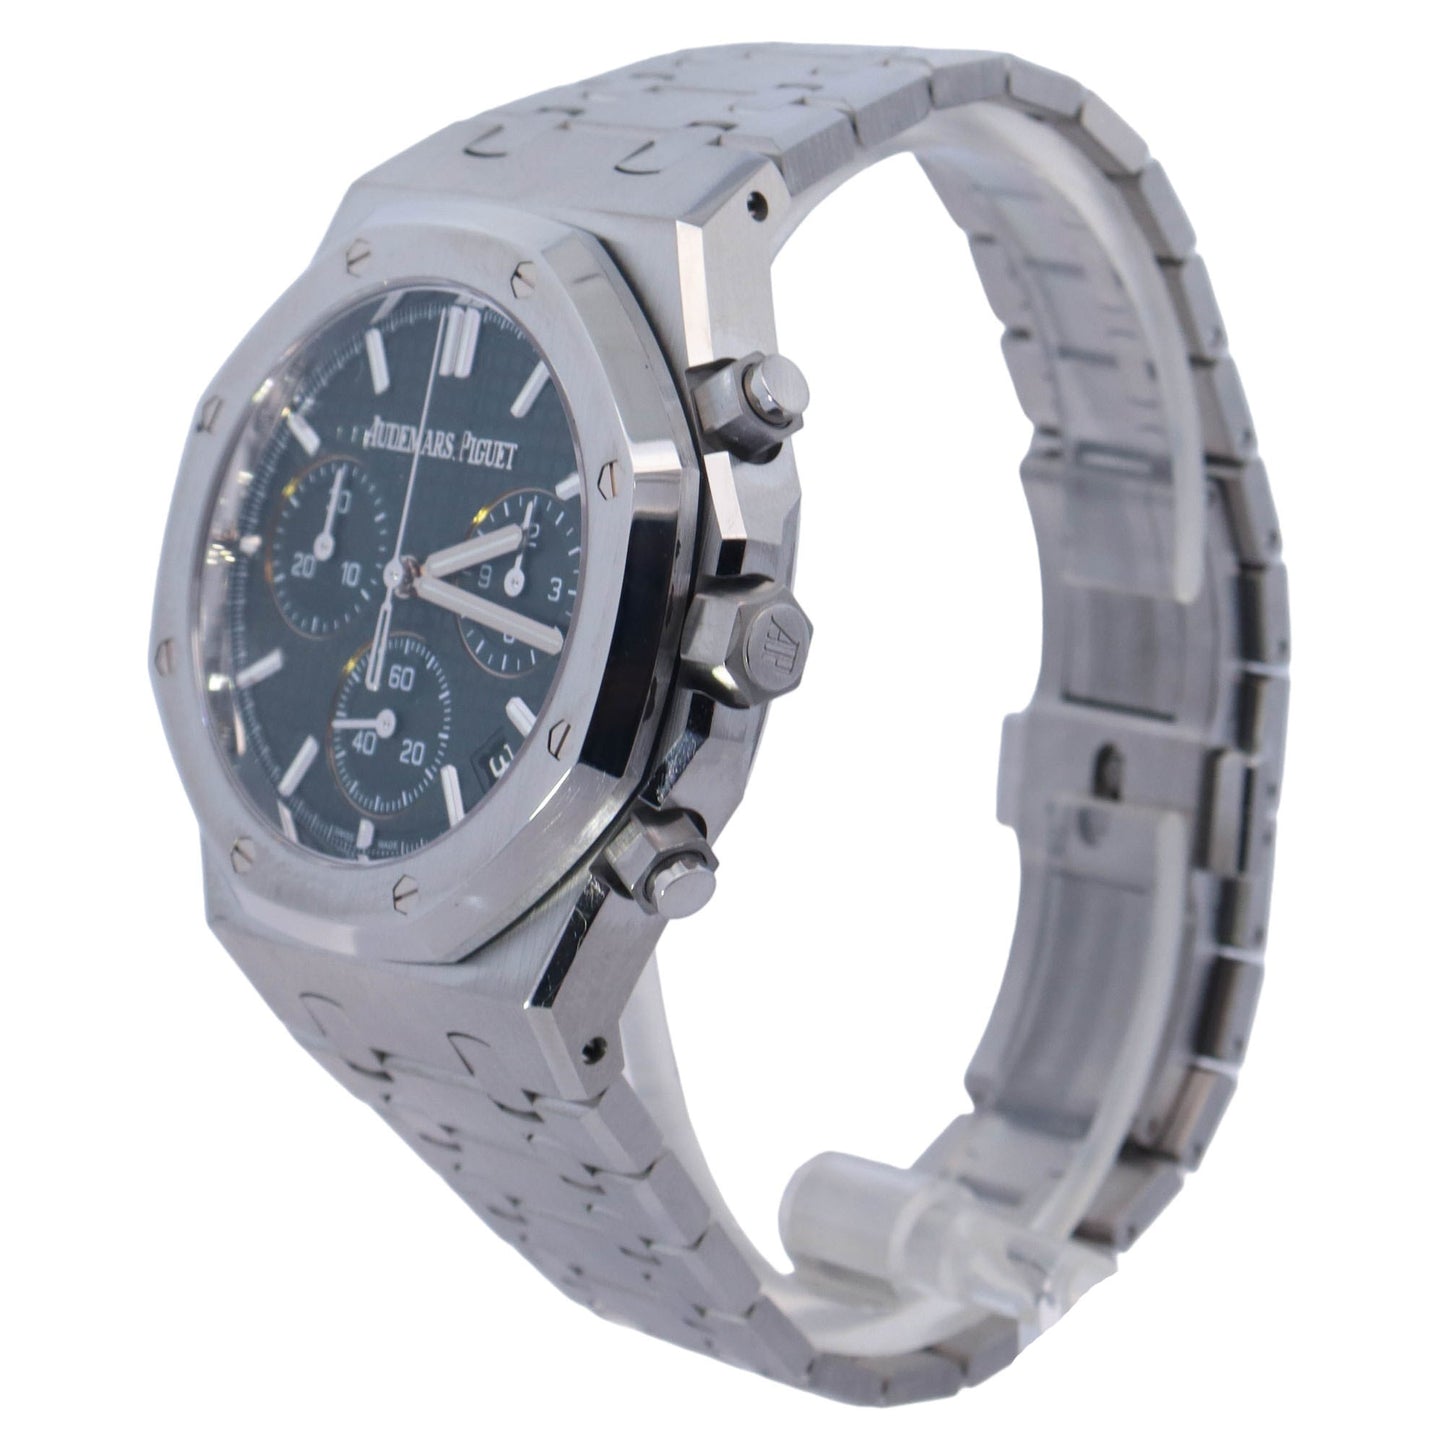 Audemars Piguet Royal Oak Stainless Steel 41mm Olive Chronograph Dial Watch Reference# 26240ST.OO.1320ST.04